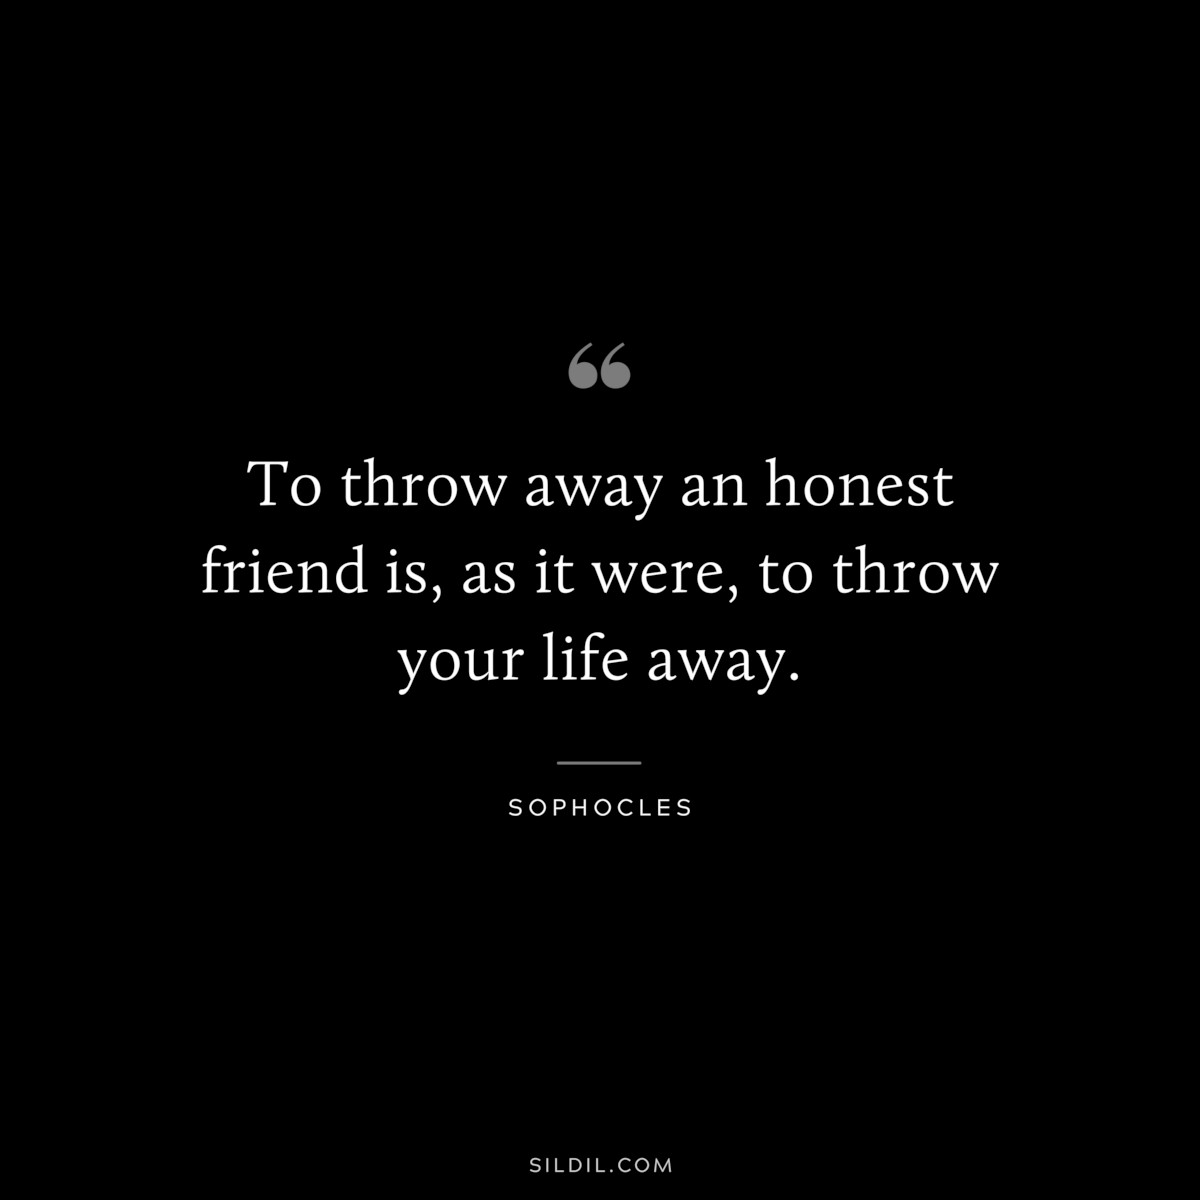 To throw away an honest friend is, as it were, to throw your life away. ― Sophocles